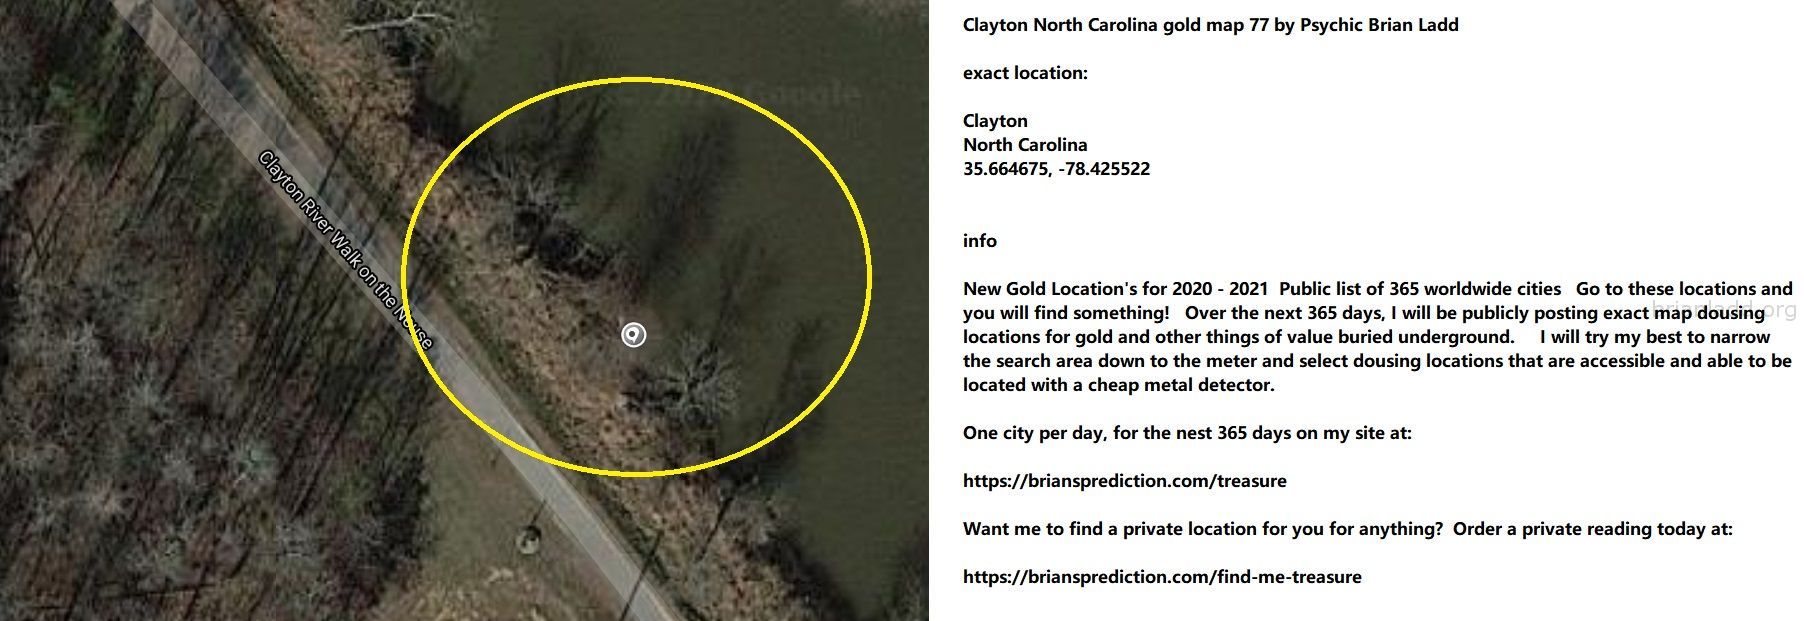 Clayton North Carolina Gold Map 77 By Psychic Brian Ladd - Clayton North Carolina Gold Map 77 By Psychic Brian Ladd  Exa...
Clayton North Carolina Gold Map 77 By Psychic Brian Ladd  Exact Location:  Clayton  North Carolina  35.664675, -78.425522  Info  New Gold Location'S For 2020 - 2021  Public List Of 365 Worldwide Cities  Go To These Locations And You Will Find Something!  Over The Next 365 Days, I Will Be Publicly Posting Exact Map Dousing Locations For Gold And Other Things Of Value Buried Underground.  I Will Try My Best To Narrow The Search Area Down To The Meter And Select Dousing Locations That Are Accessible And Able To Be Located With A Cheap Metal Detector.  One City Per Day, For The Nest 365 Days On My Site At:   https://briansprediction.com/Treasure  Want Me To Find A Private Location For You For Anything?  Order A Private Reading Today At:   https://briansprediction.com/Find-Me-Treasure
